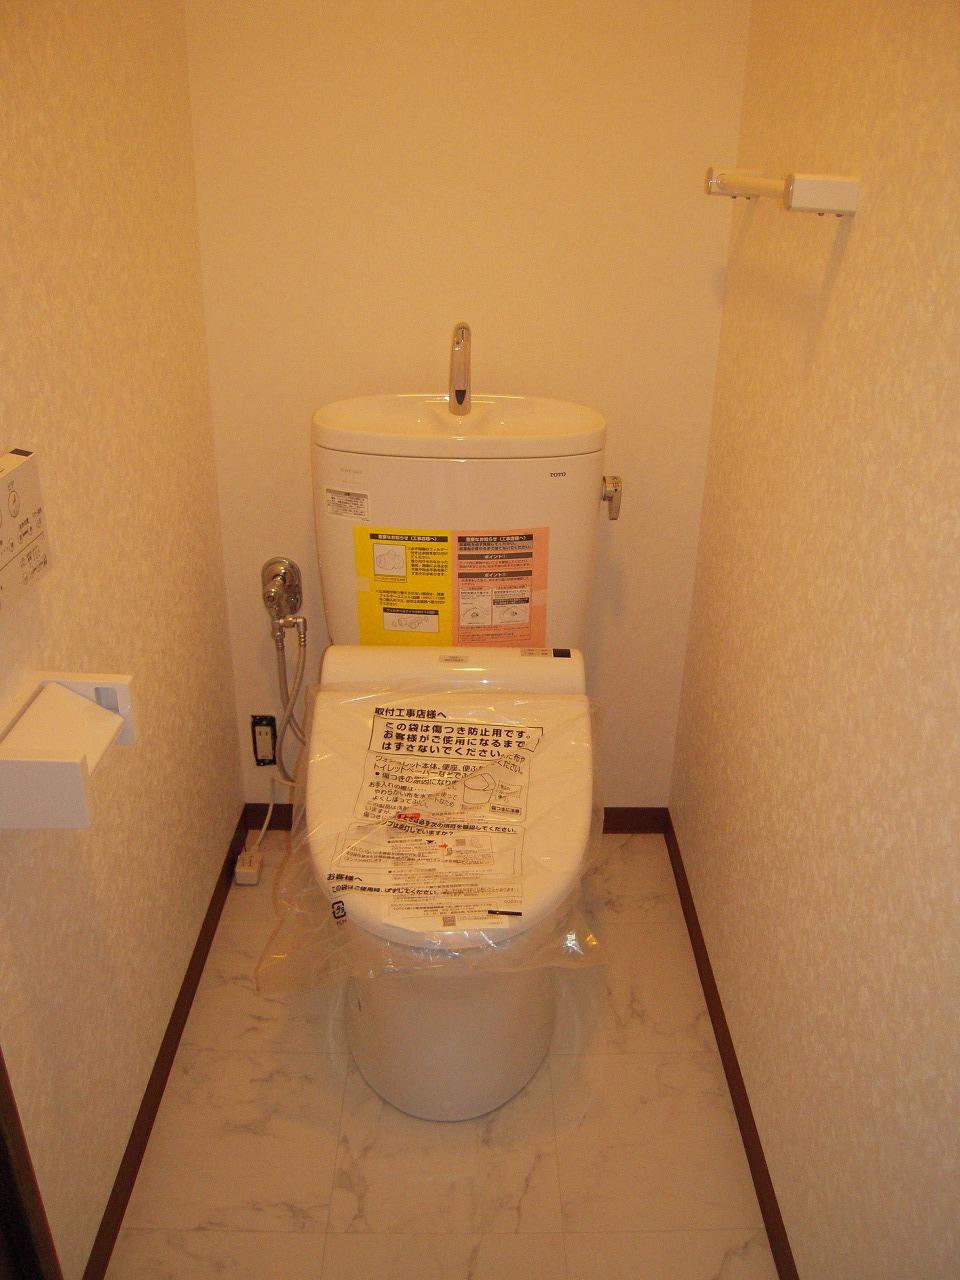 Toilet. It is a new article.